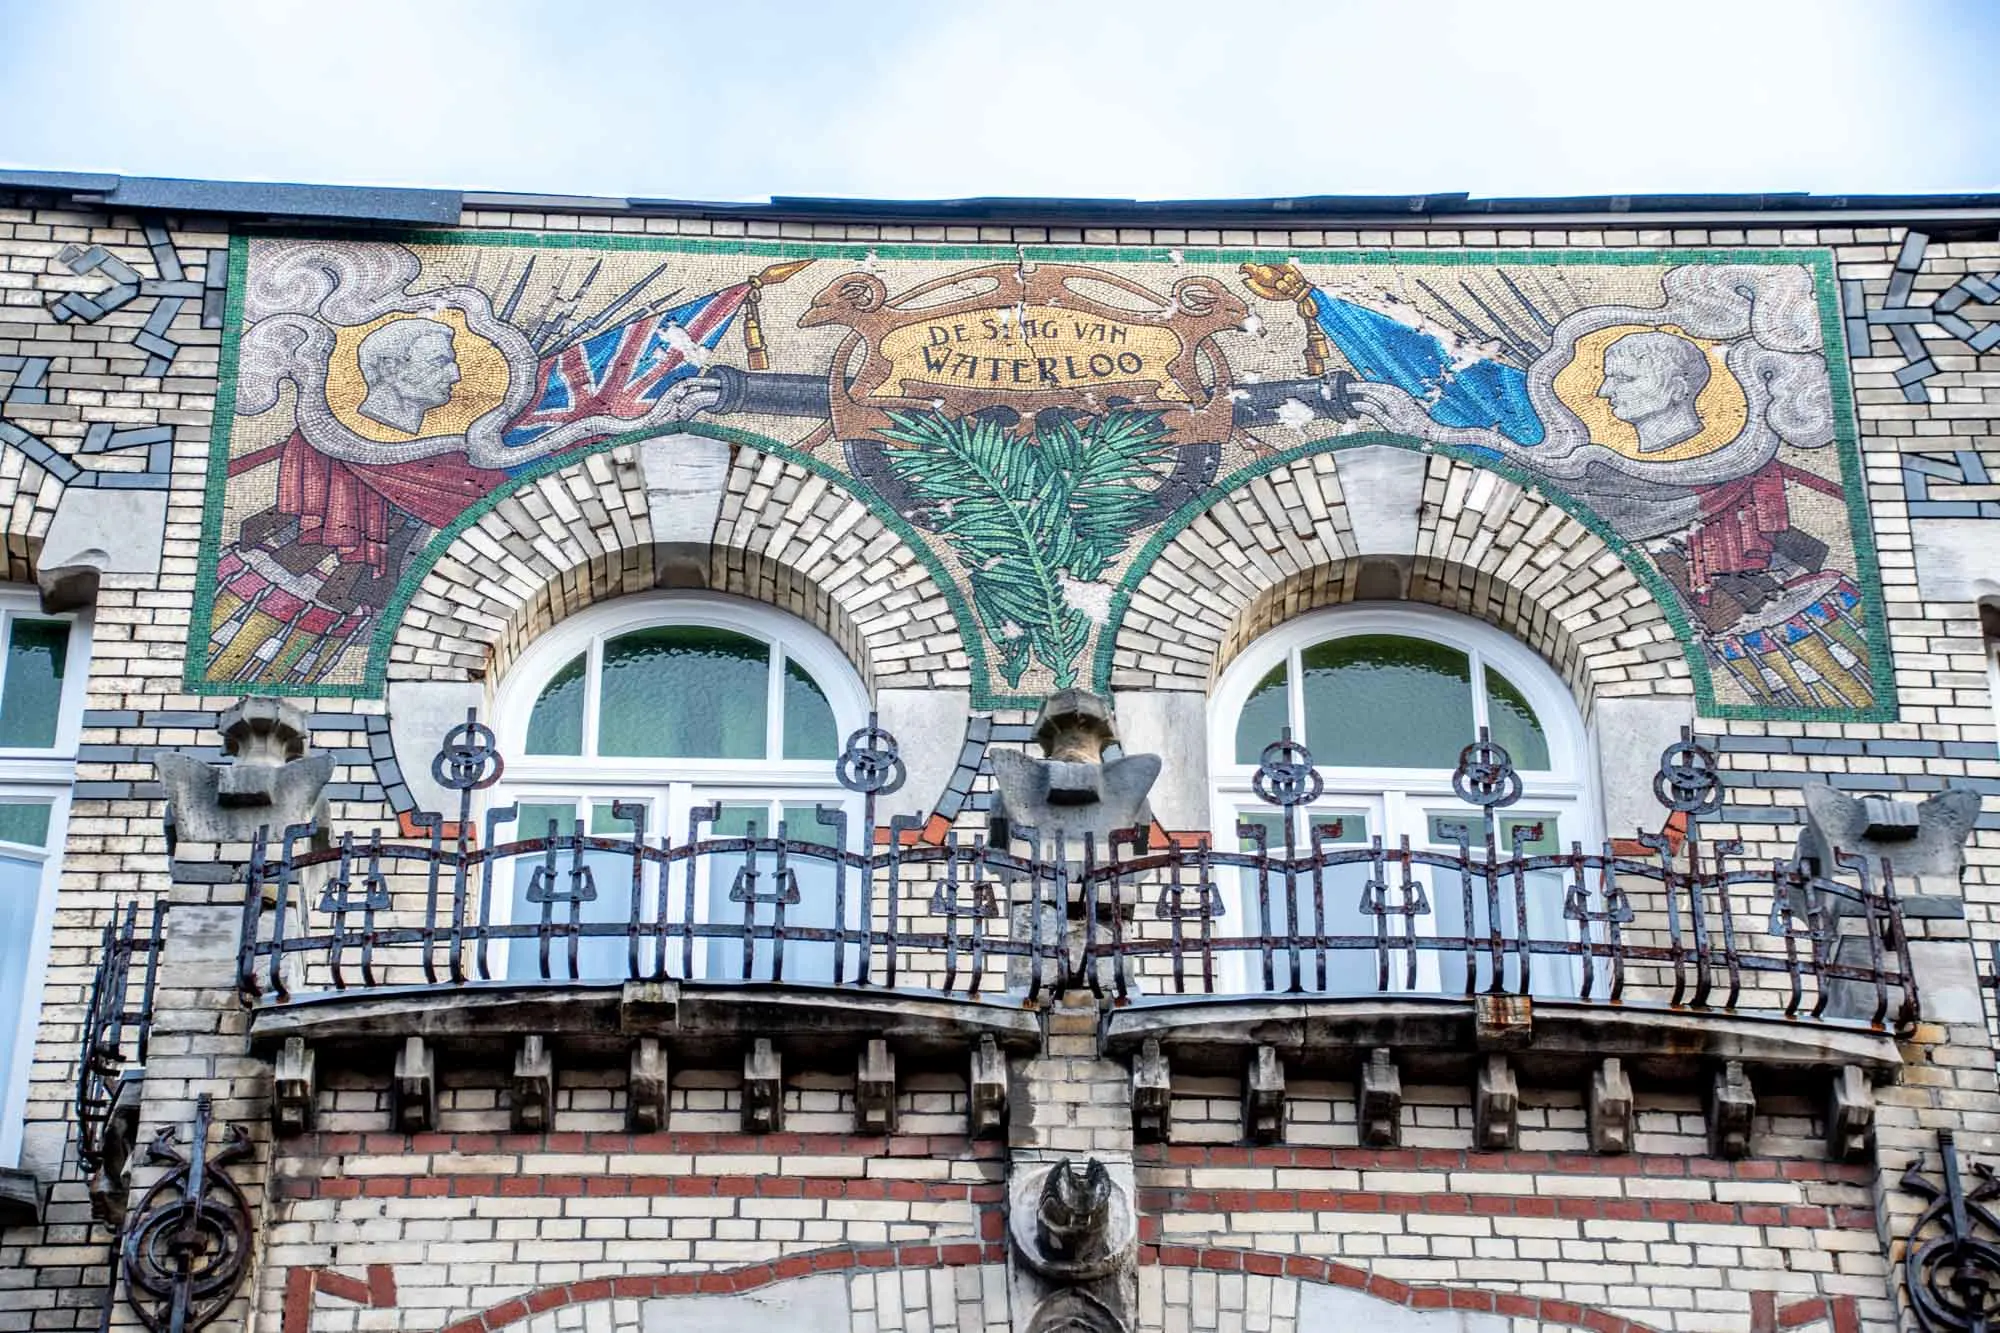 Exterior of a building with a colorful mosaic, rounded windows, and intricate iron balconies